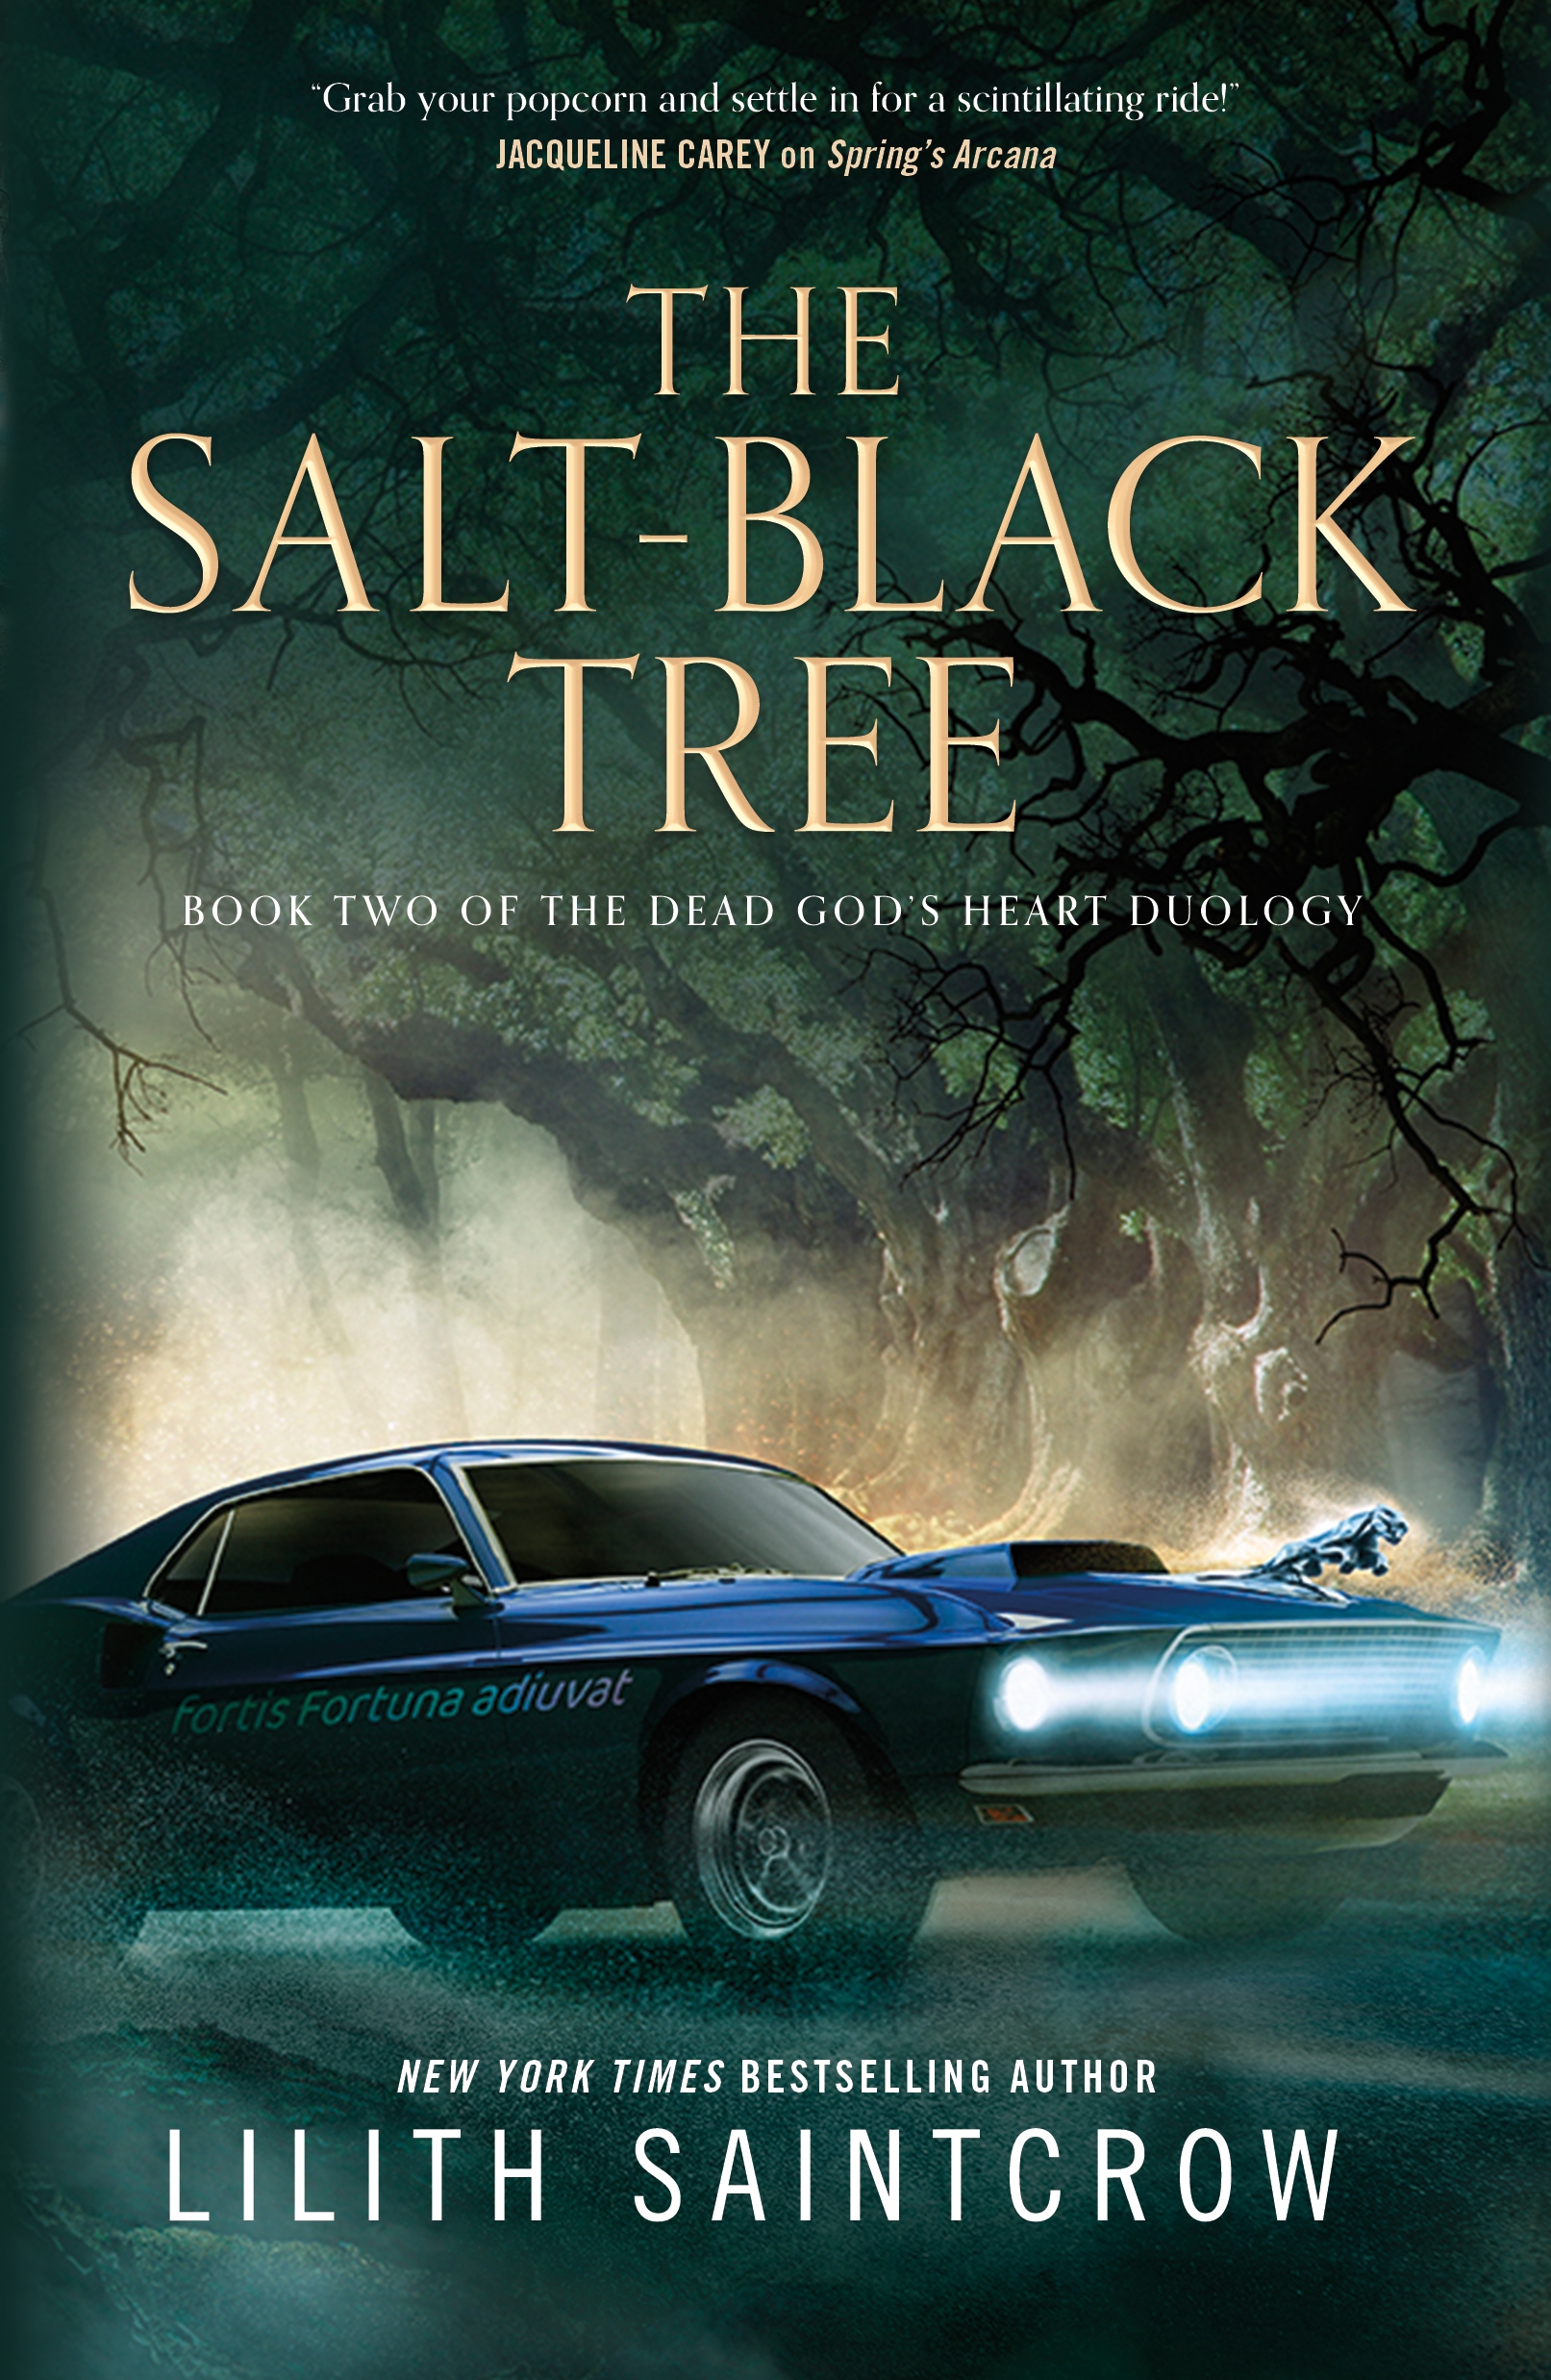 The Salt-Black Tree : Book Two of the Dead God's Heart Duology by Lilith Saintcrow